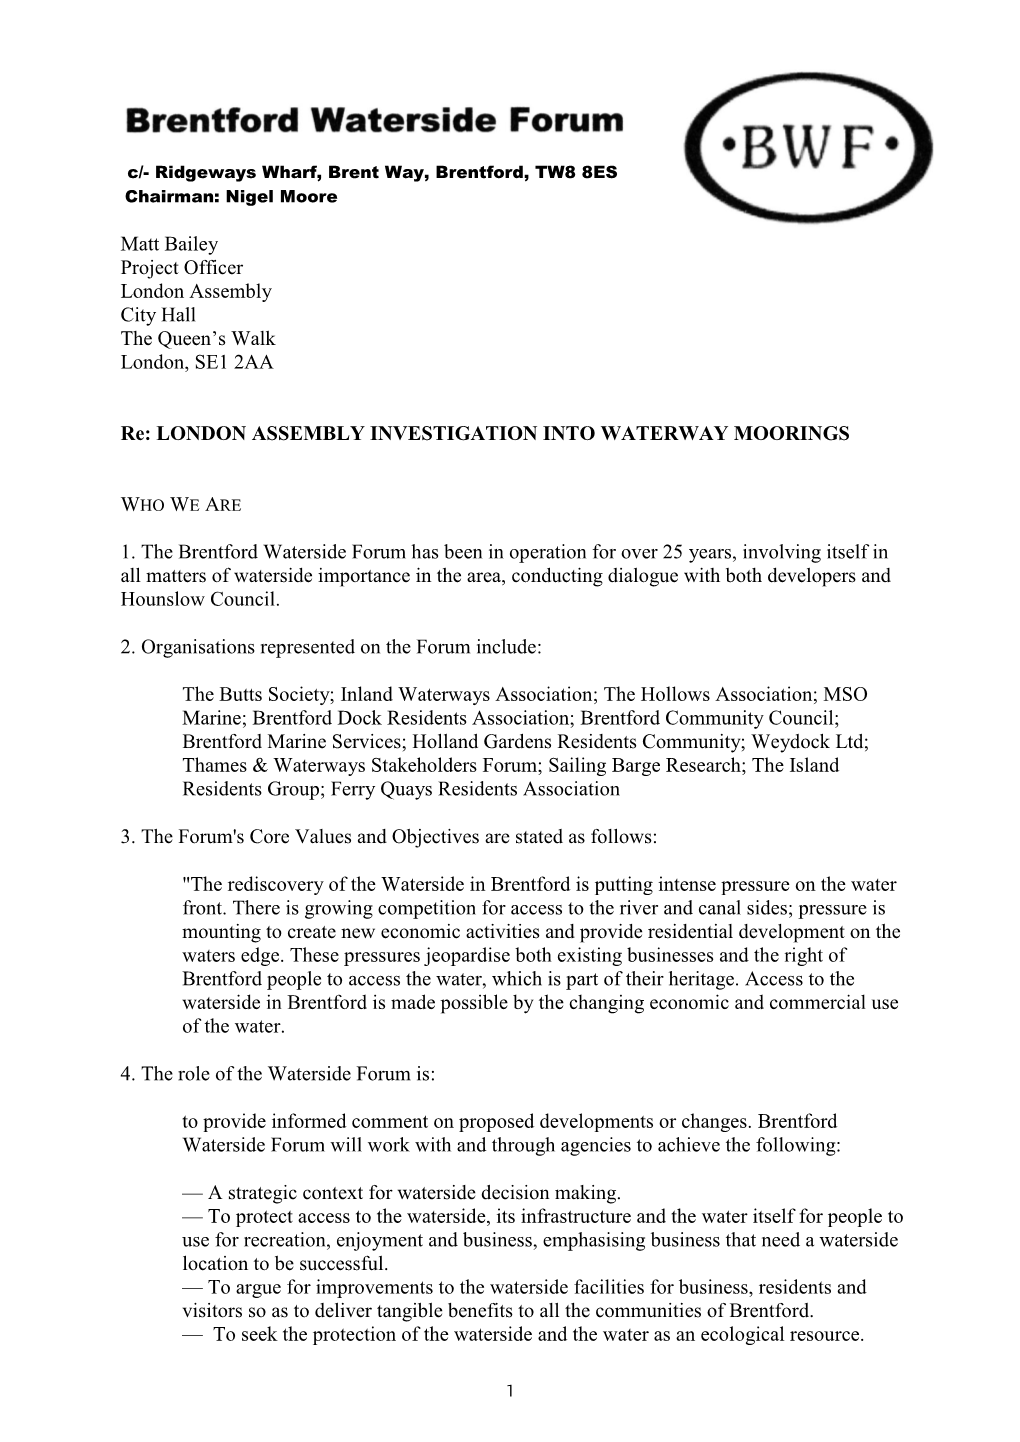 London Assembly Investigation Into Waterway Moorings